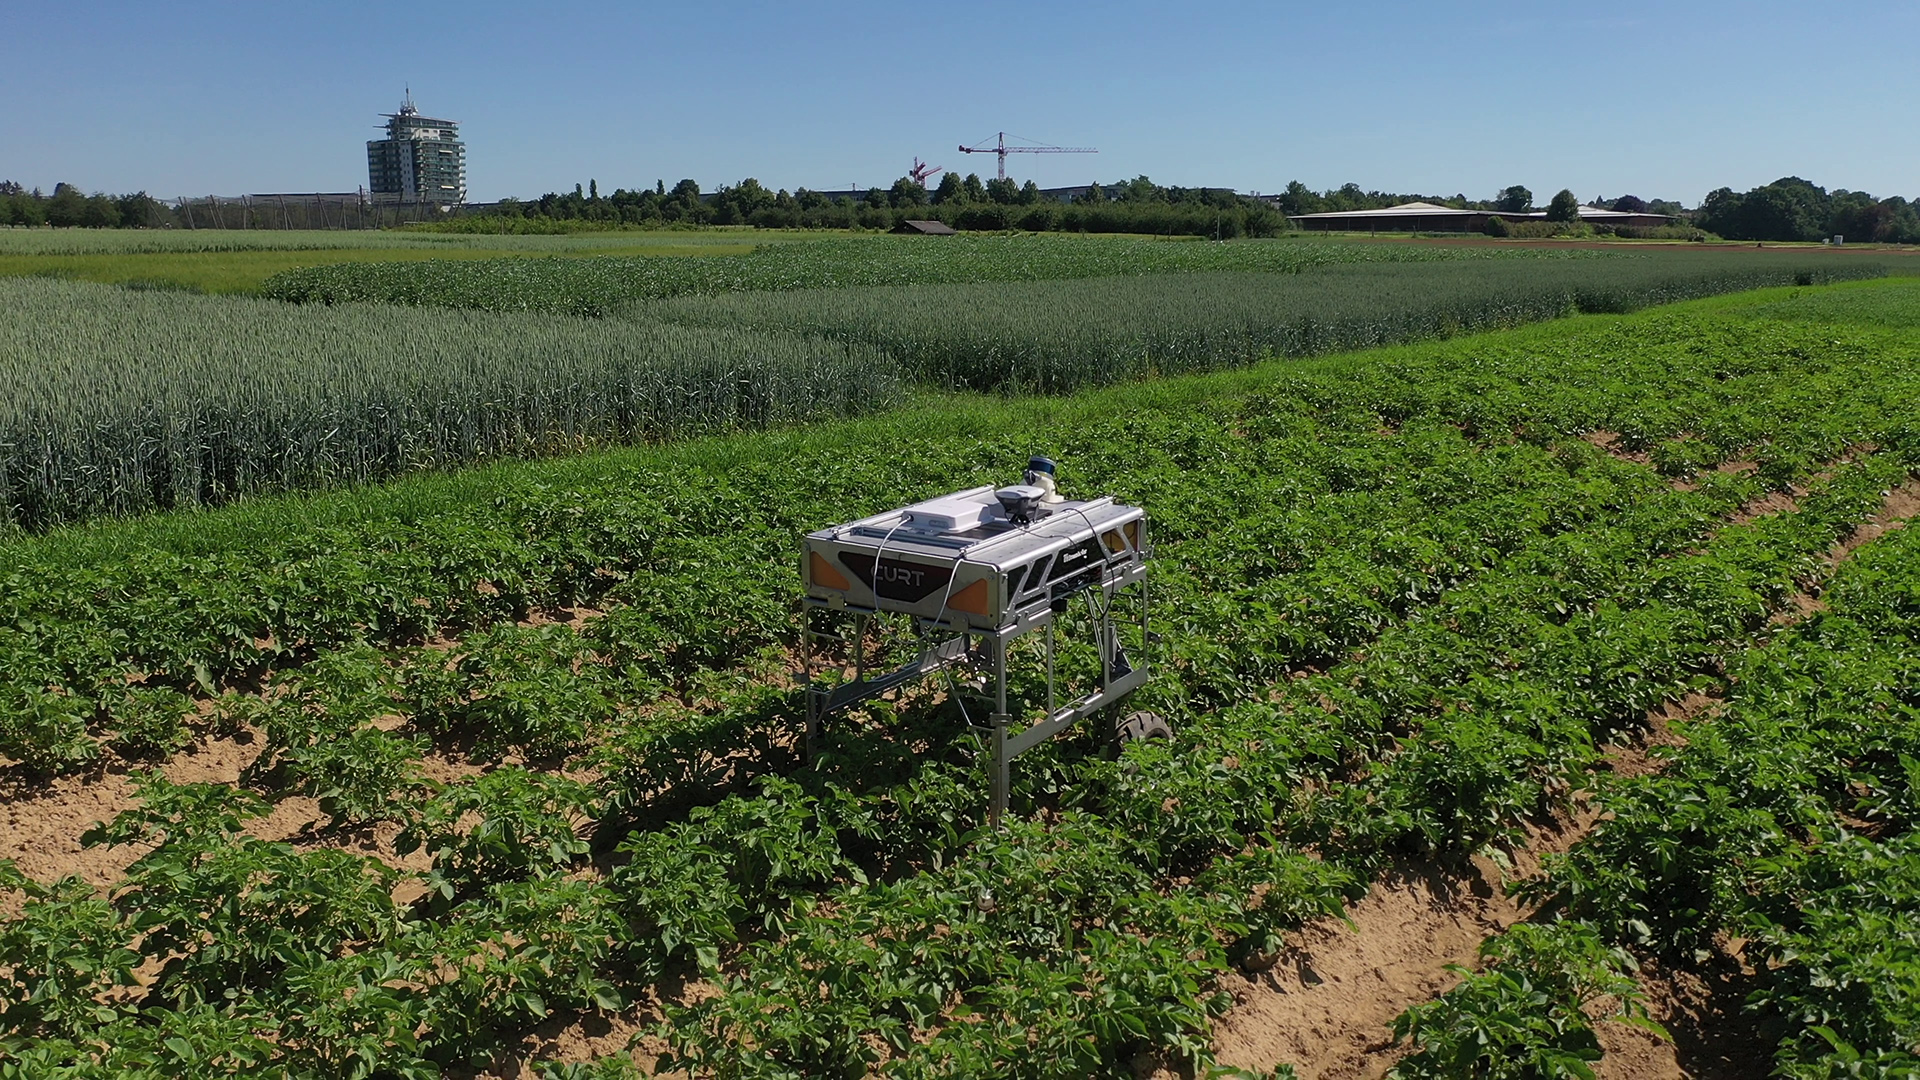 The robot CURTdiff can autonomously recognize and move along rows of crops